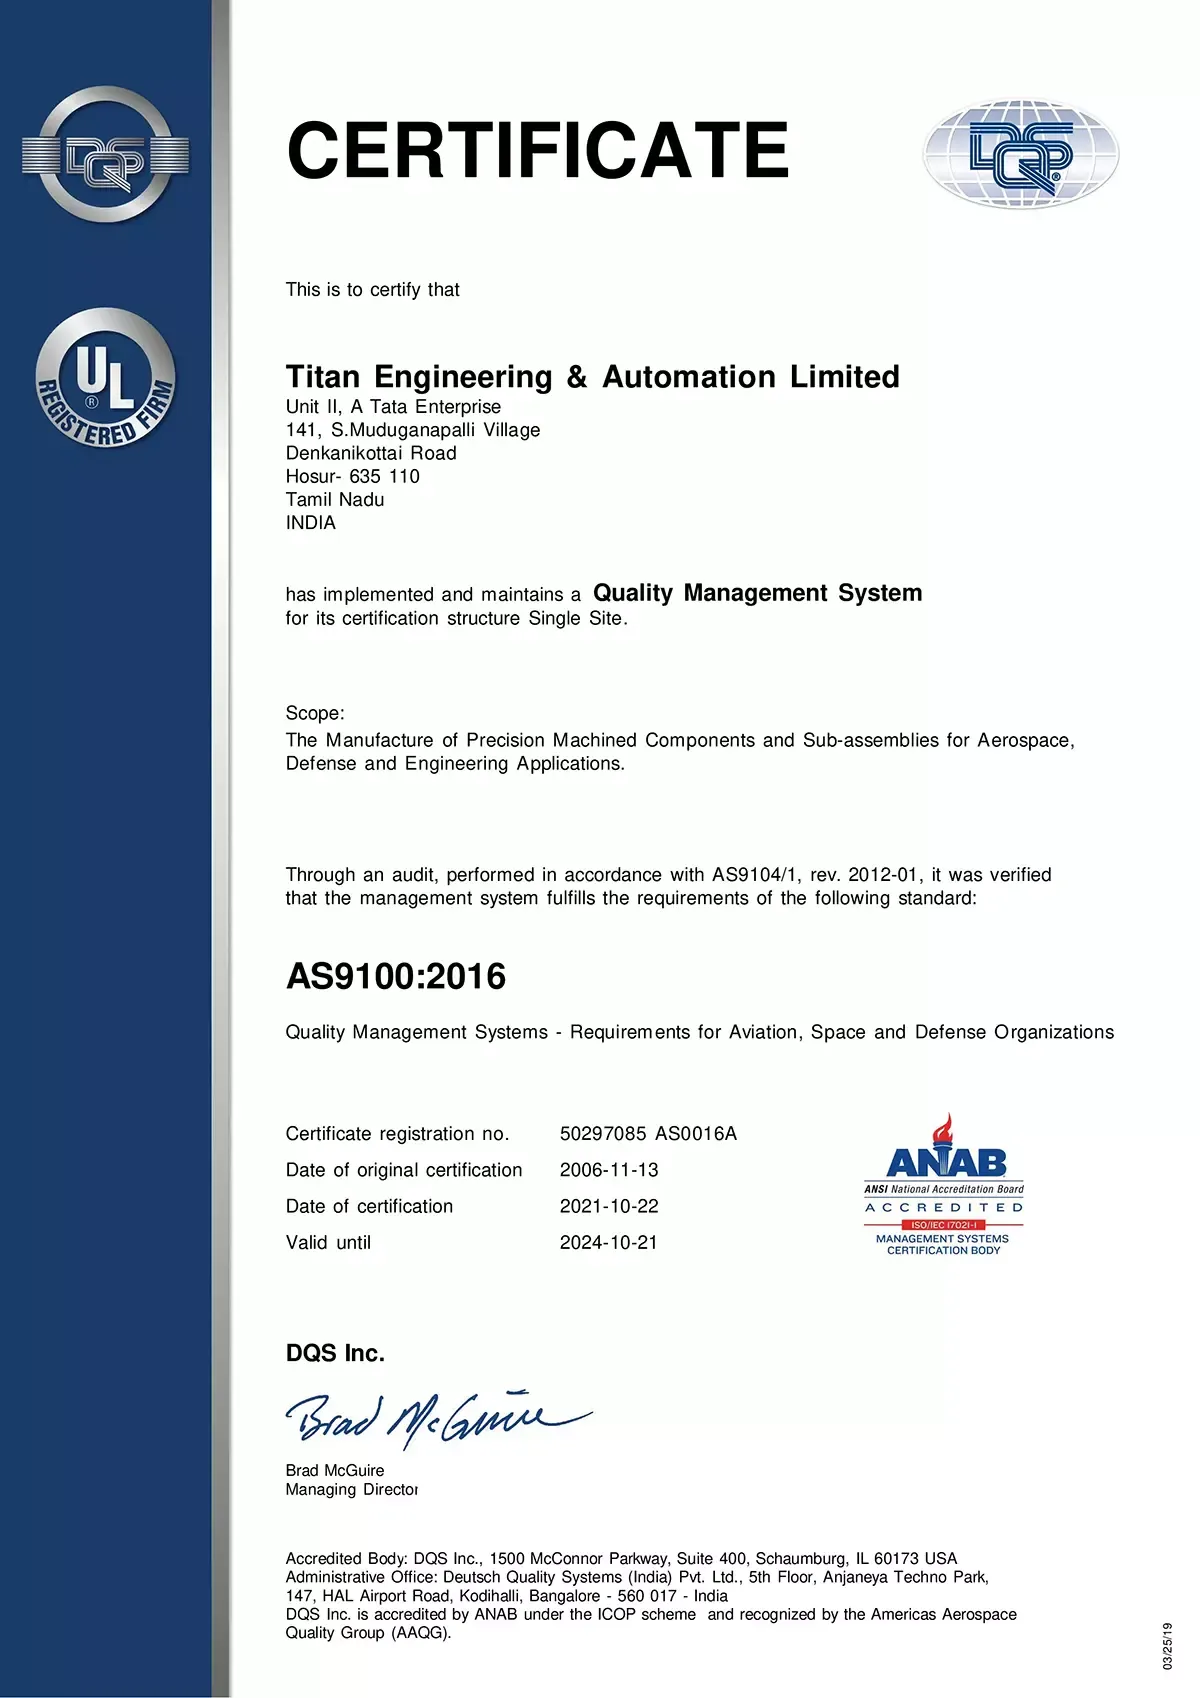 Titan engineering and automation Limited (TEAL) Quality Managment System for Aerospcae and Defence Certificate 